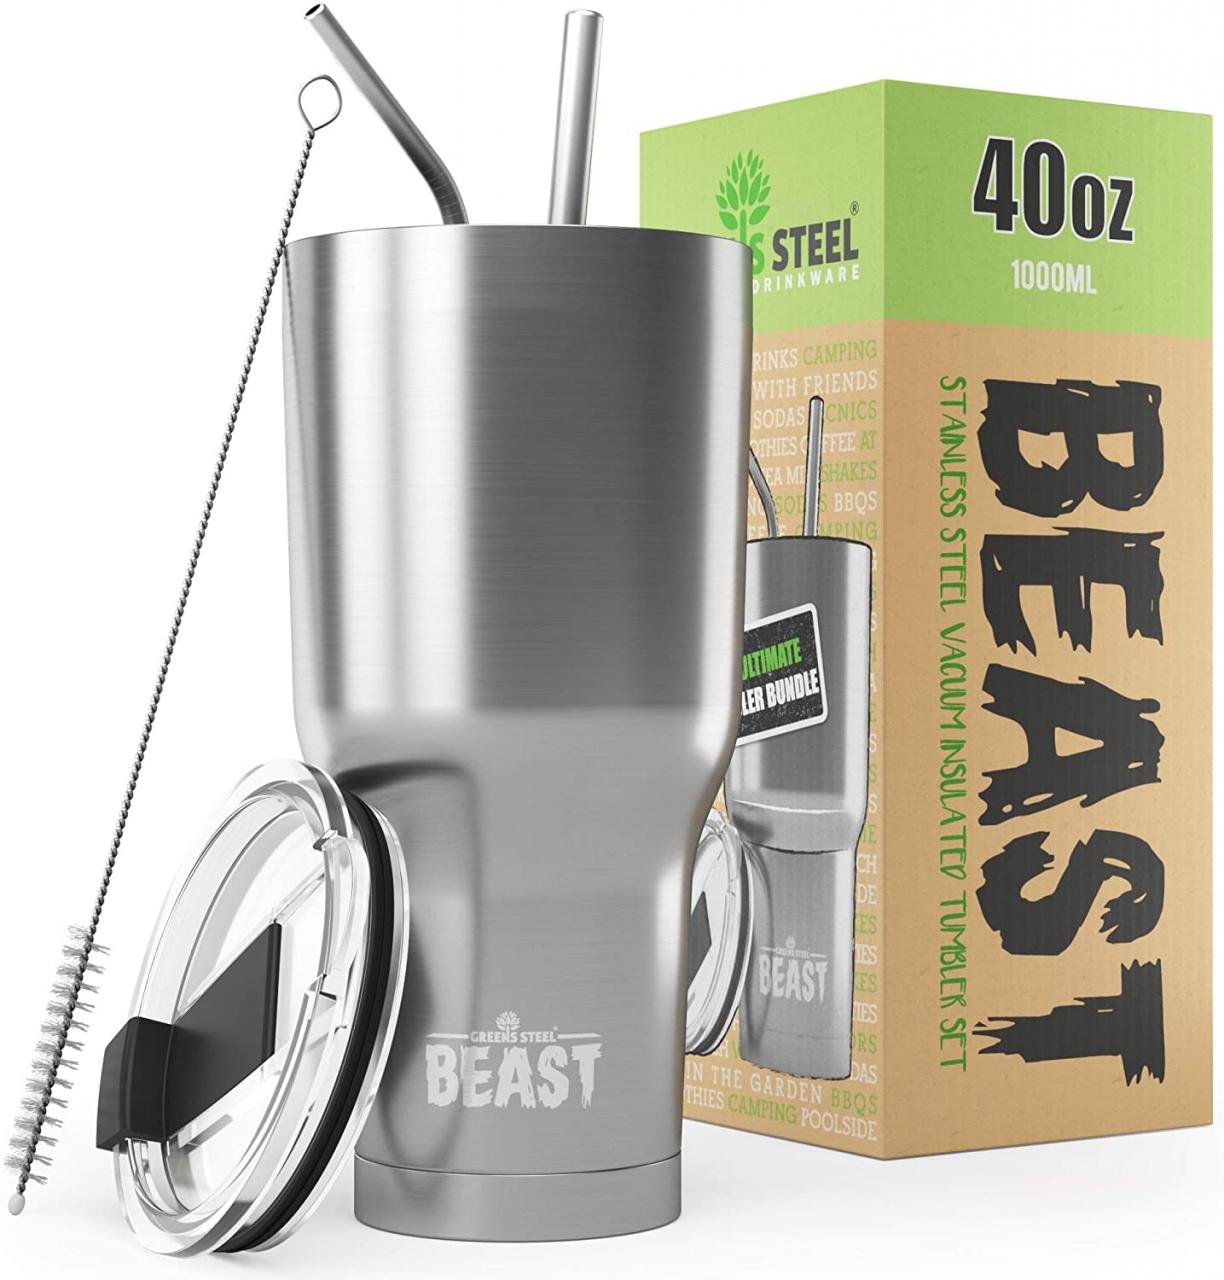 Buy BEAST 40oz Stainless Steel Tumbler Vacuum Insulated Coffee Cup Double  Wall Travel Flask Mug with Splash Proof Lid, 2 Straws, Pipe Brush & Box  Bundle By Greens Steel Online in Indonesia.